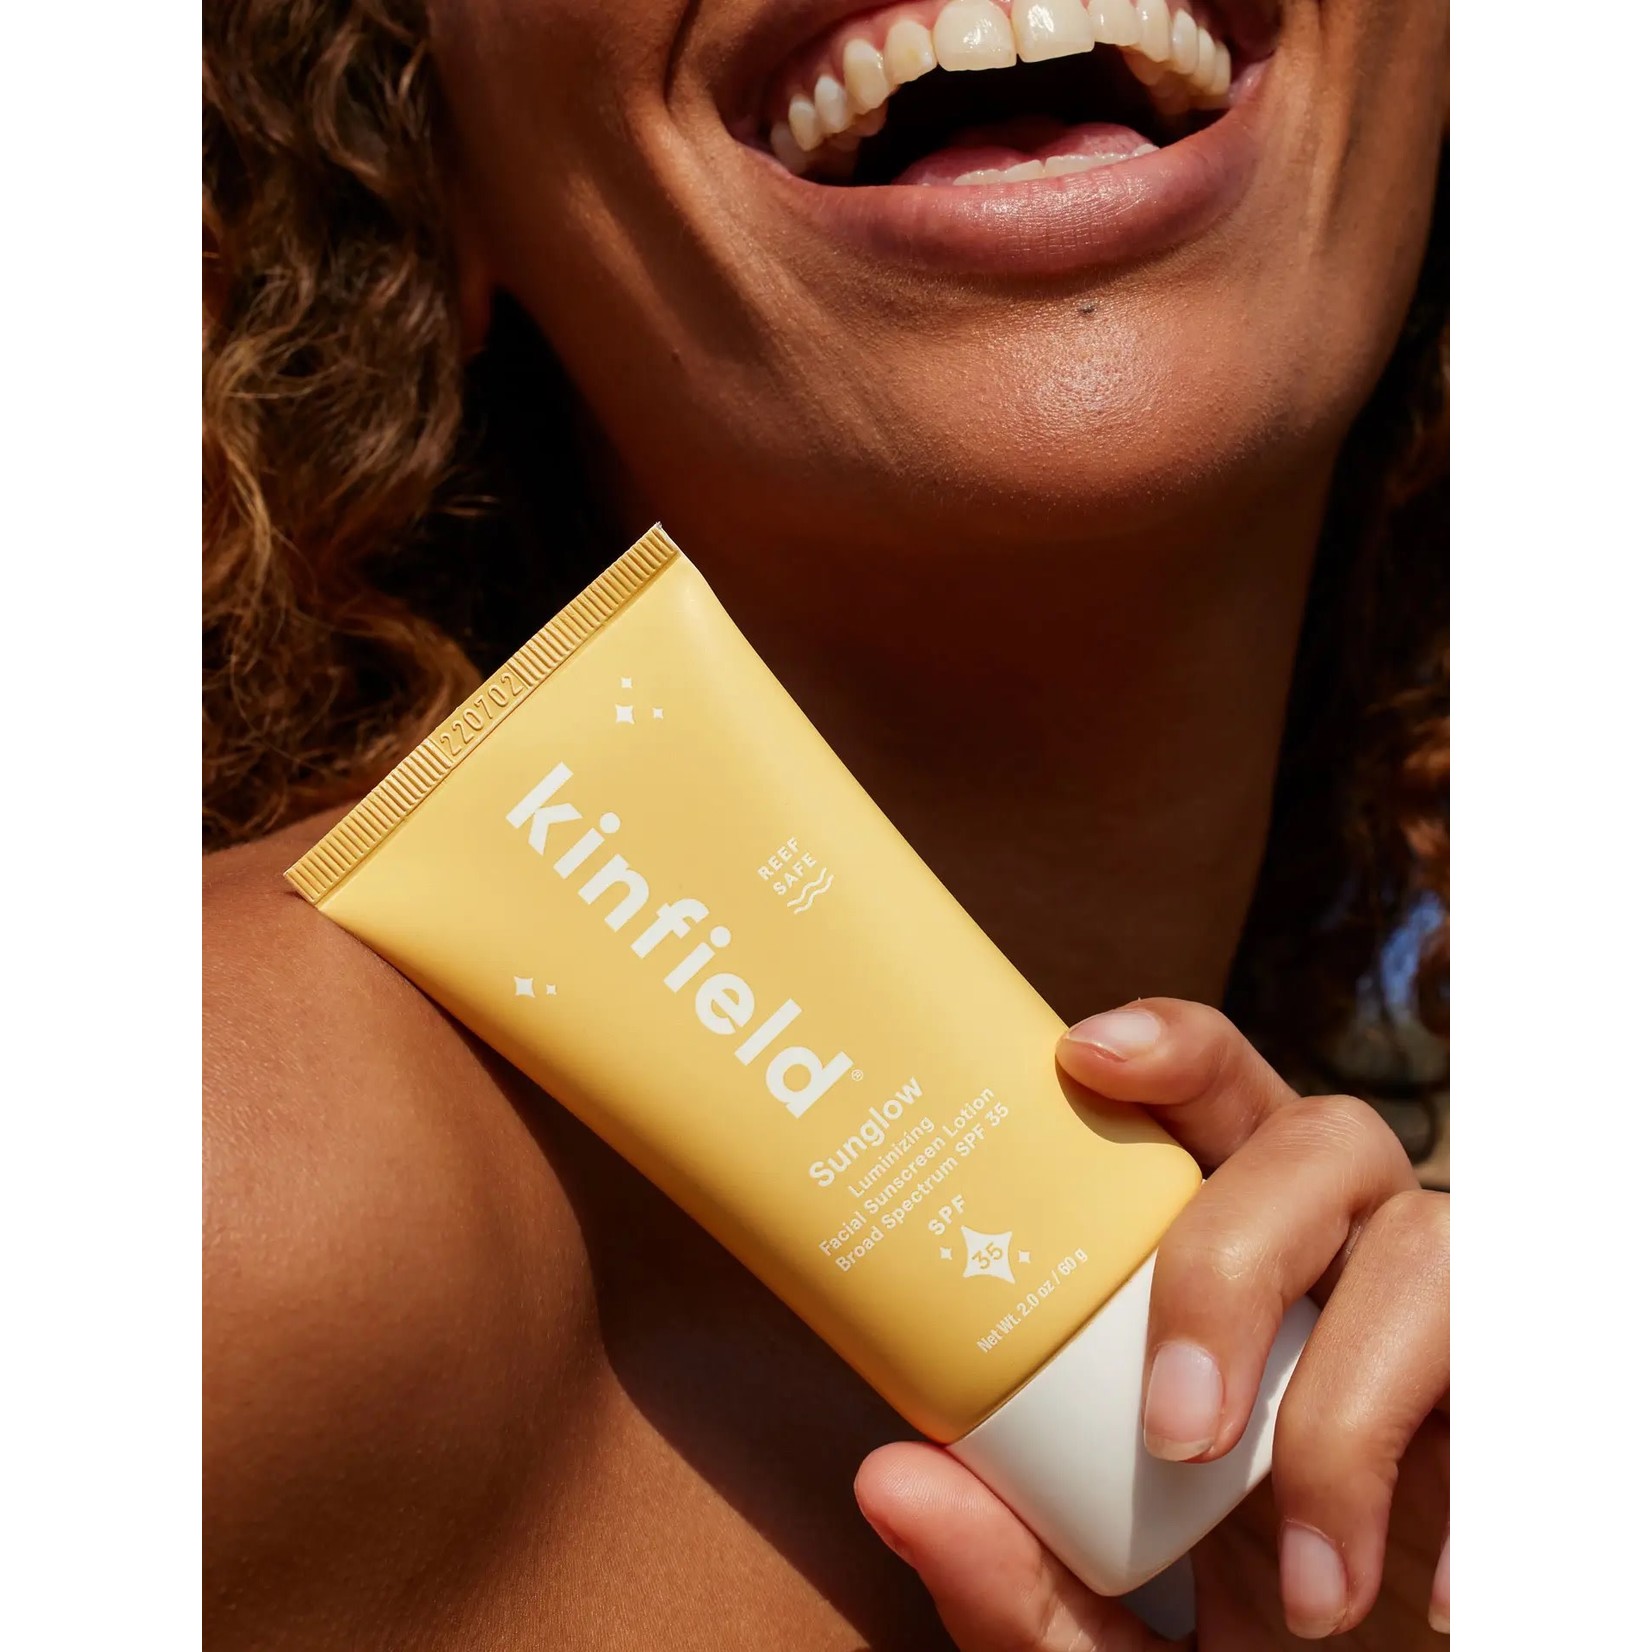 Kinfield Sunglow SPF 35 Luminizing Tinted Mineral Sunscreen